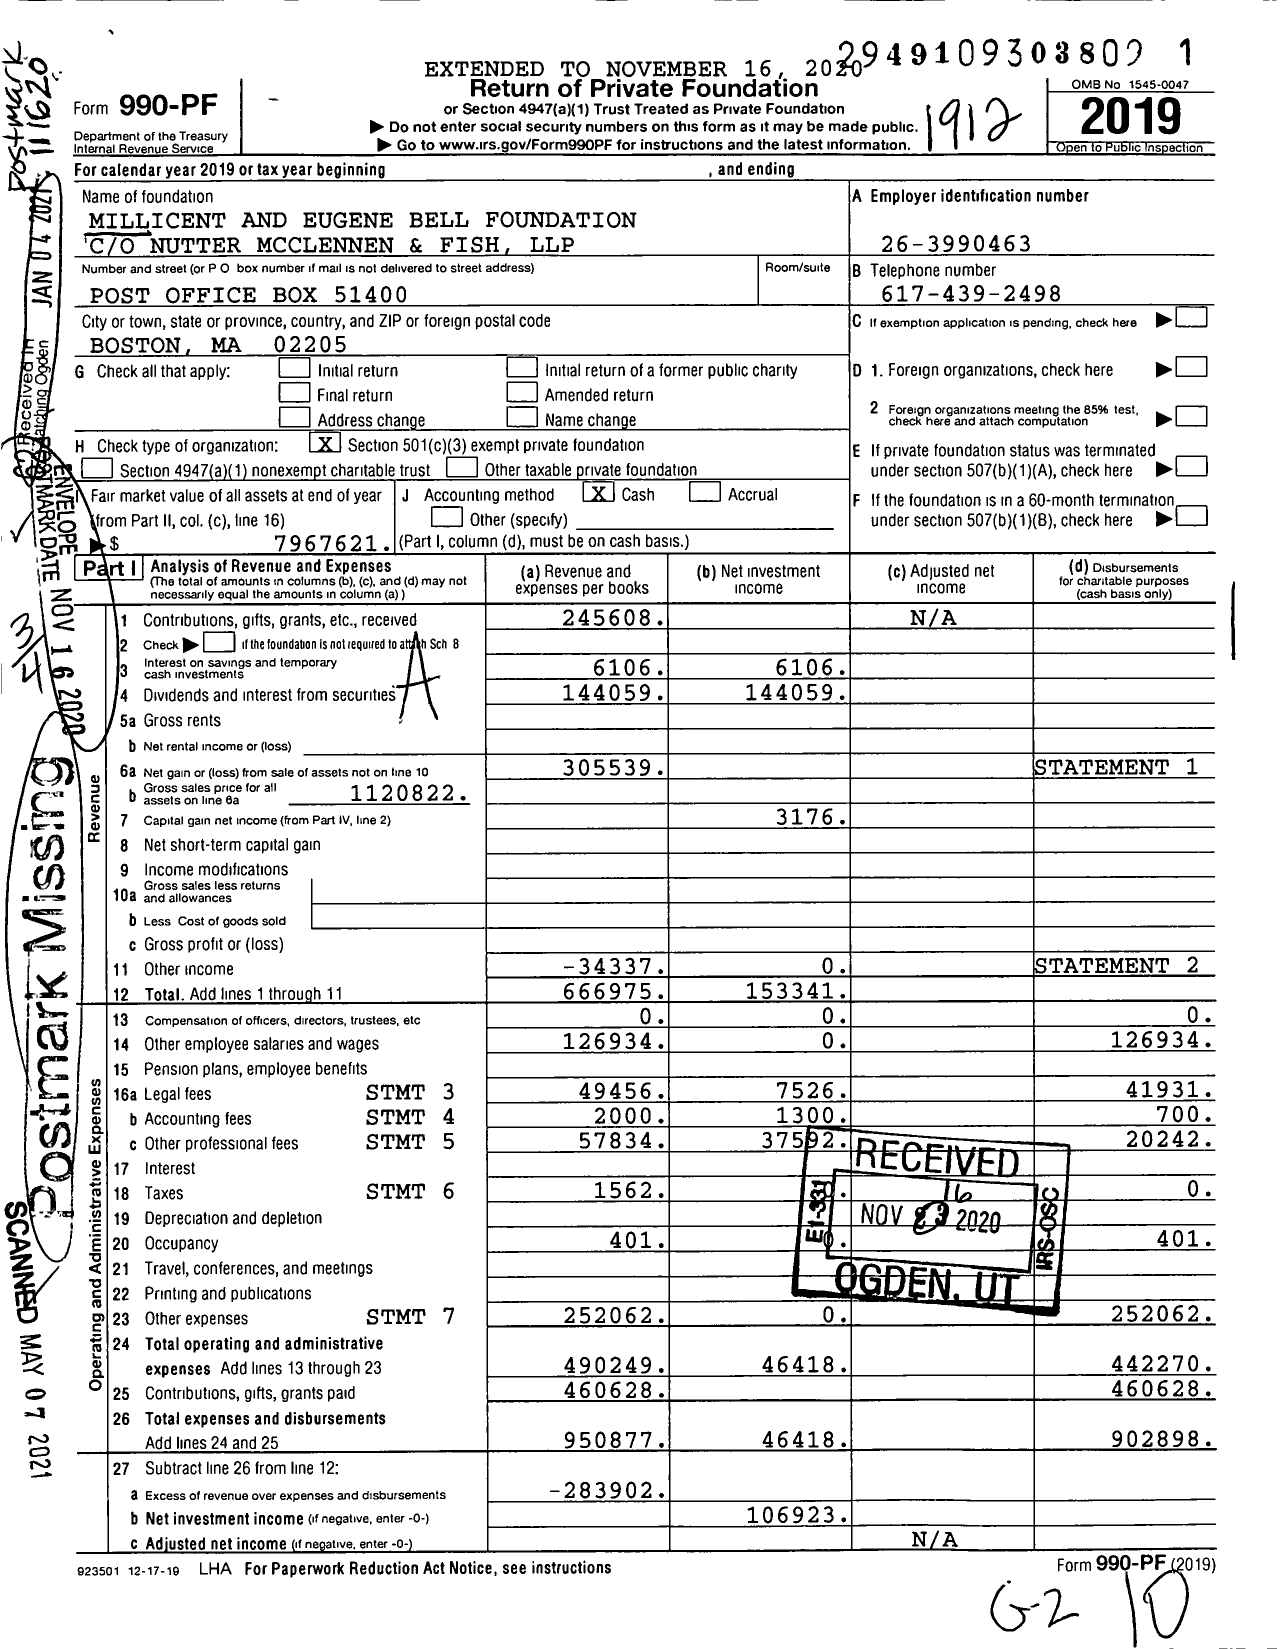 Image of first page of 2019 Form 990PF for Millicent and Eugene Bell Foundation